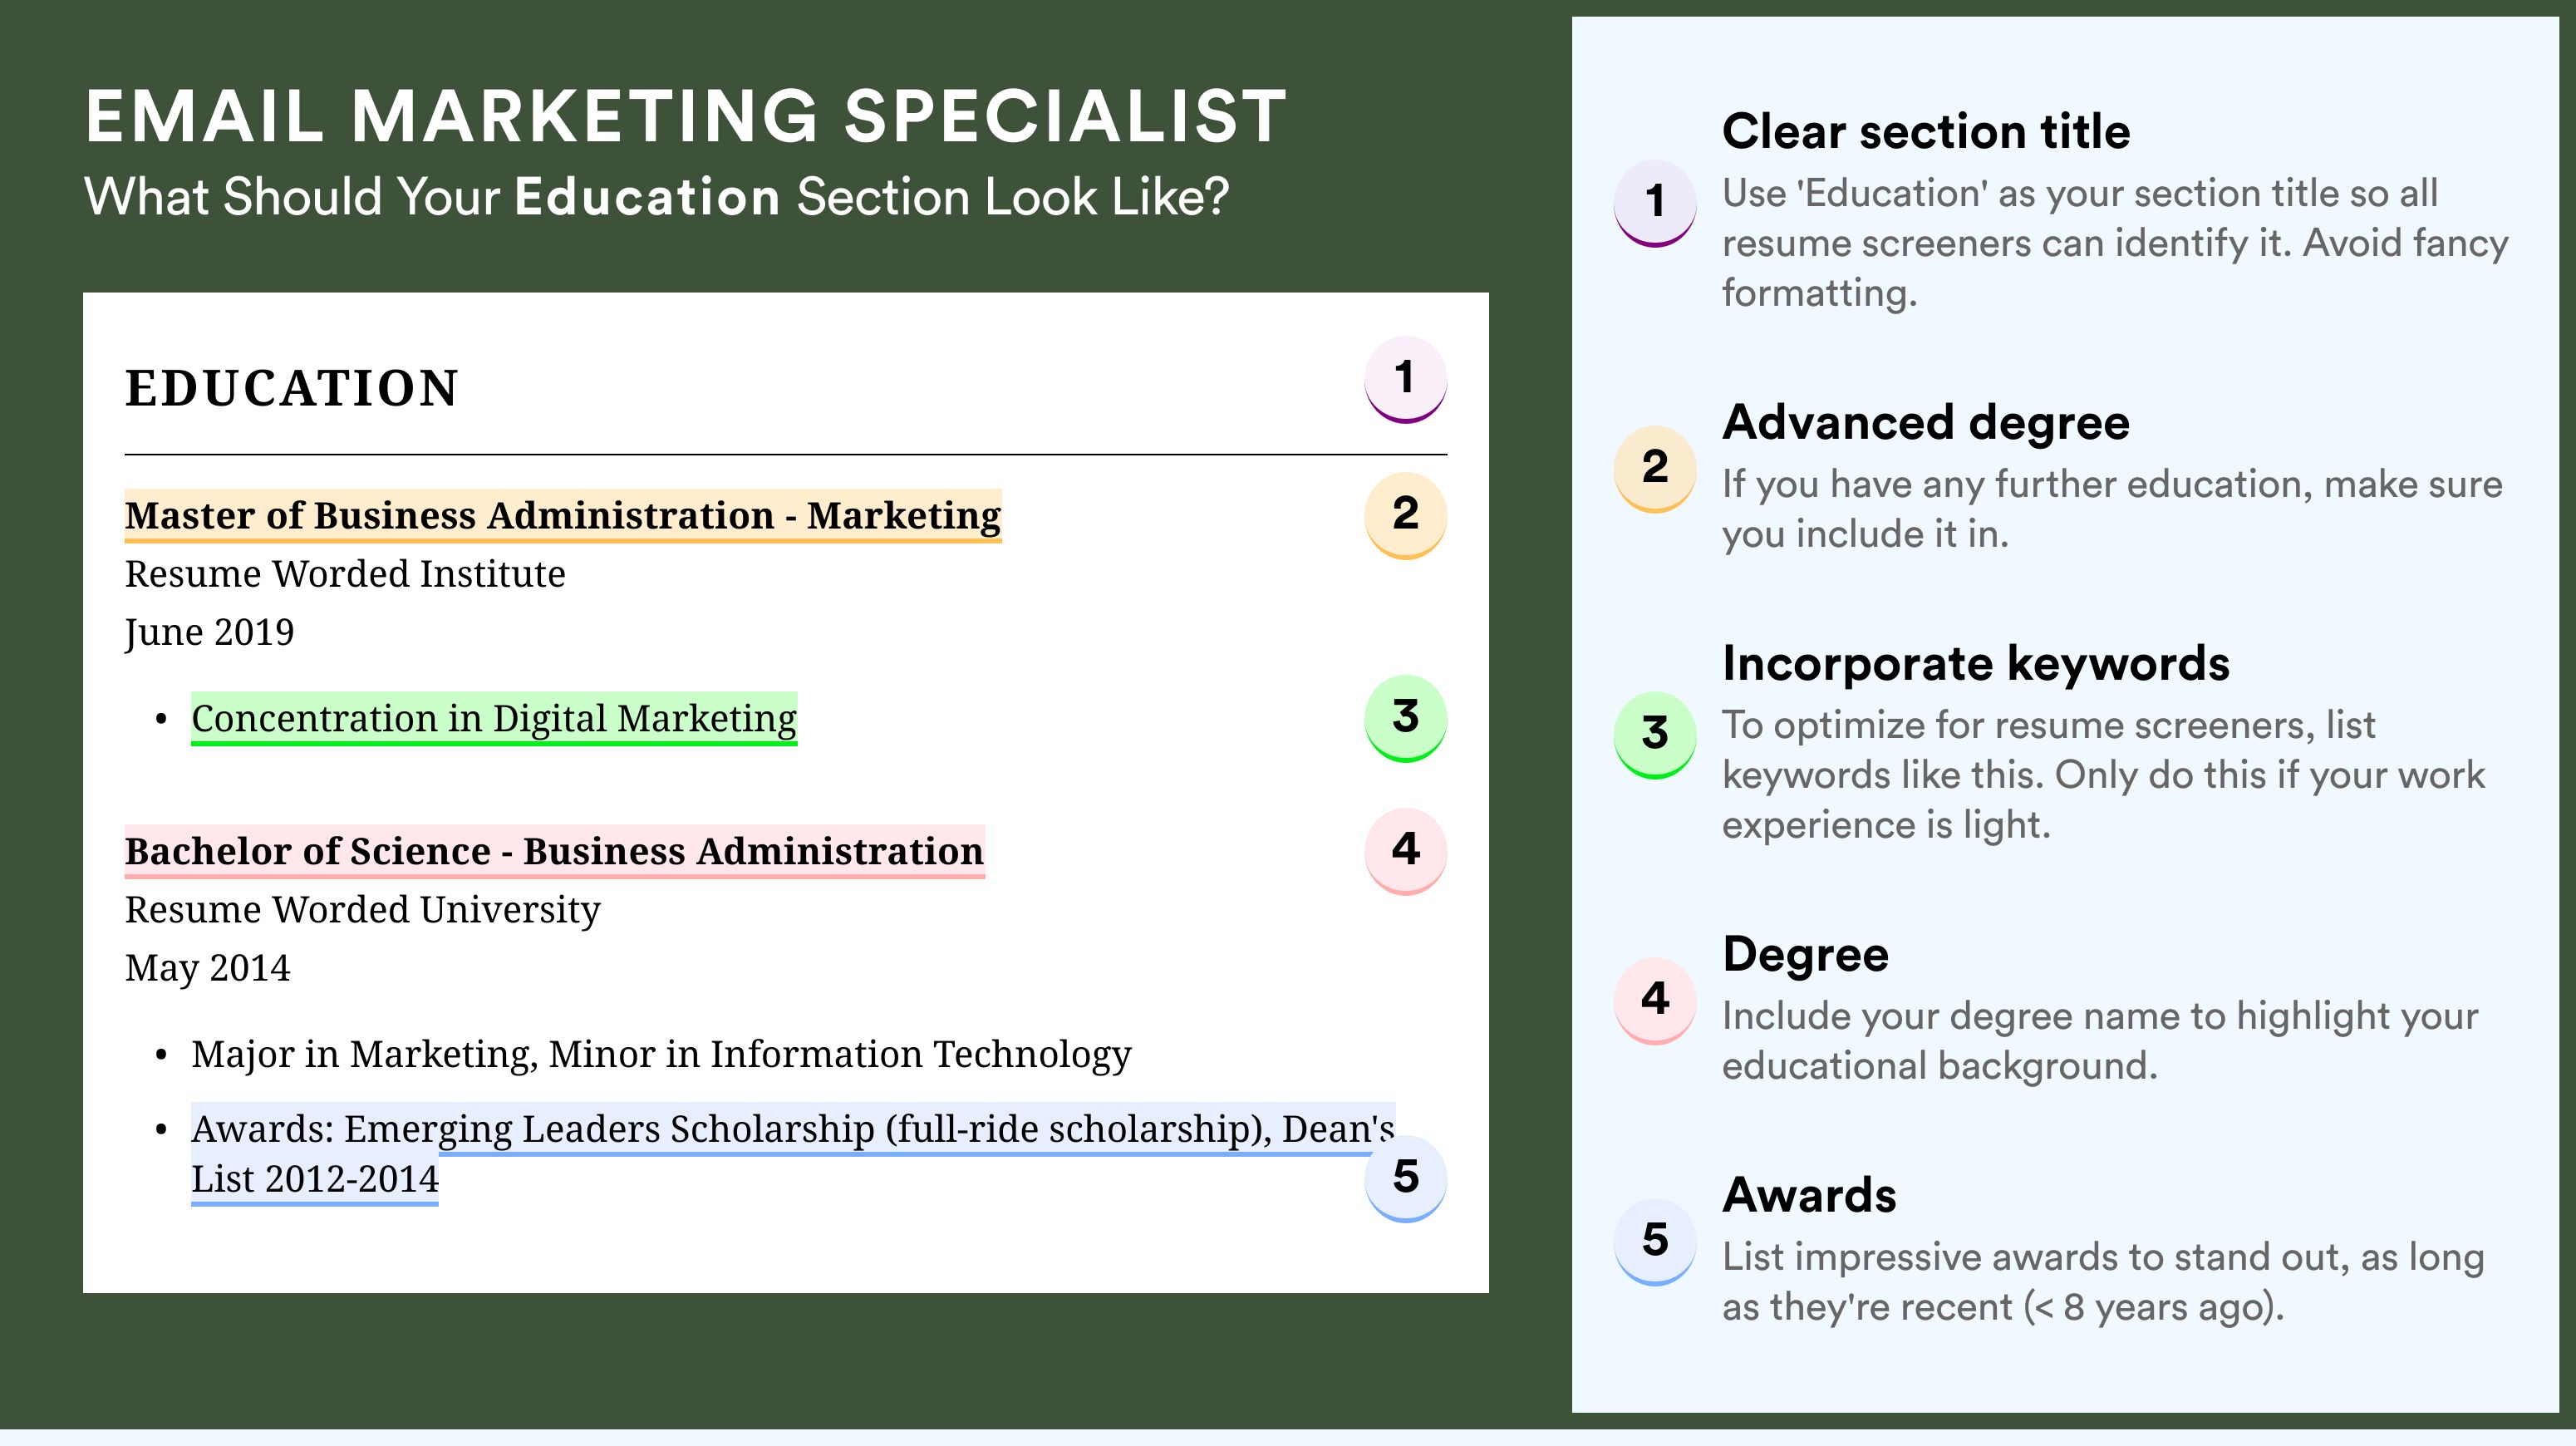 How To Write An Education Section - Email Marketing Specialist Roles